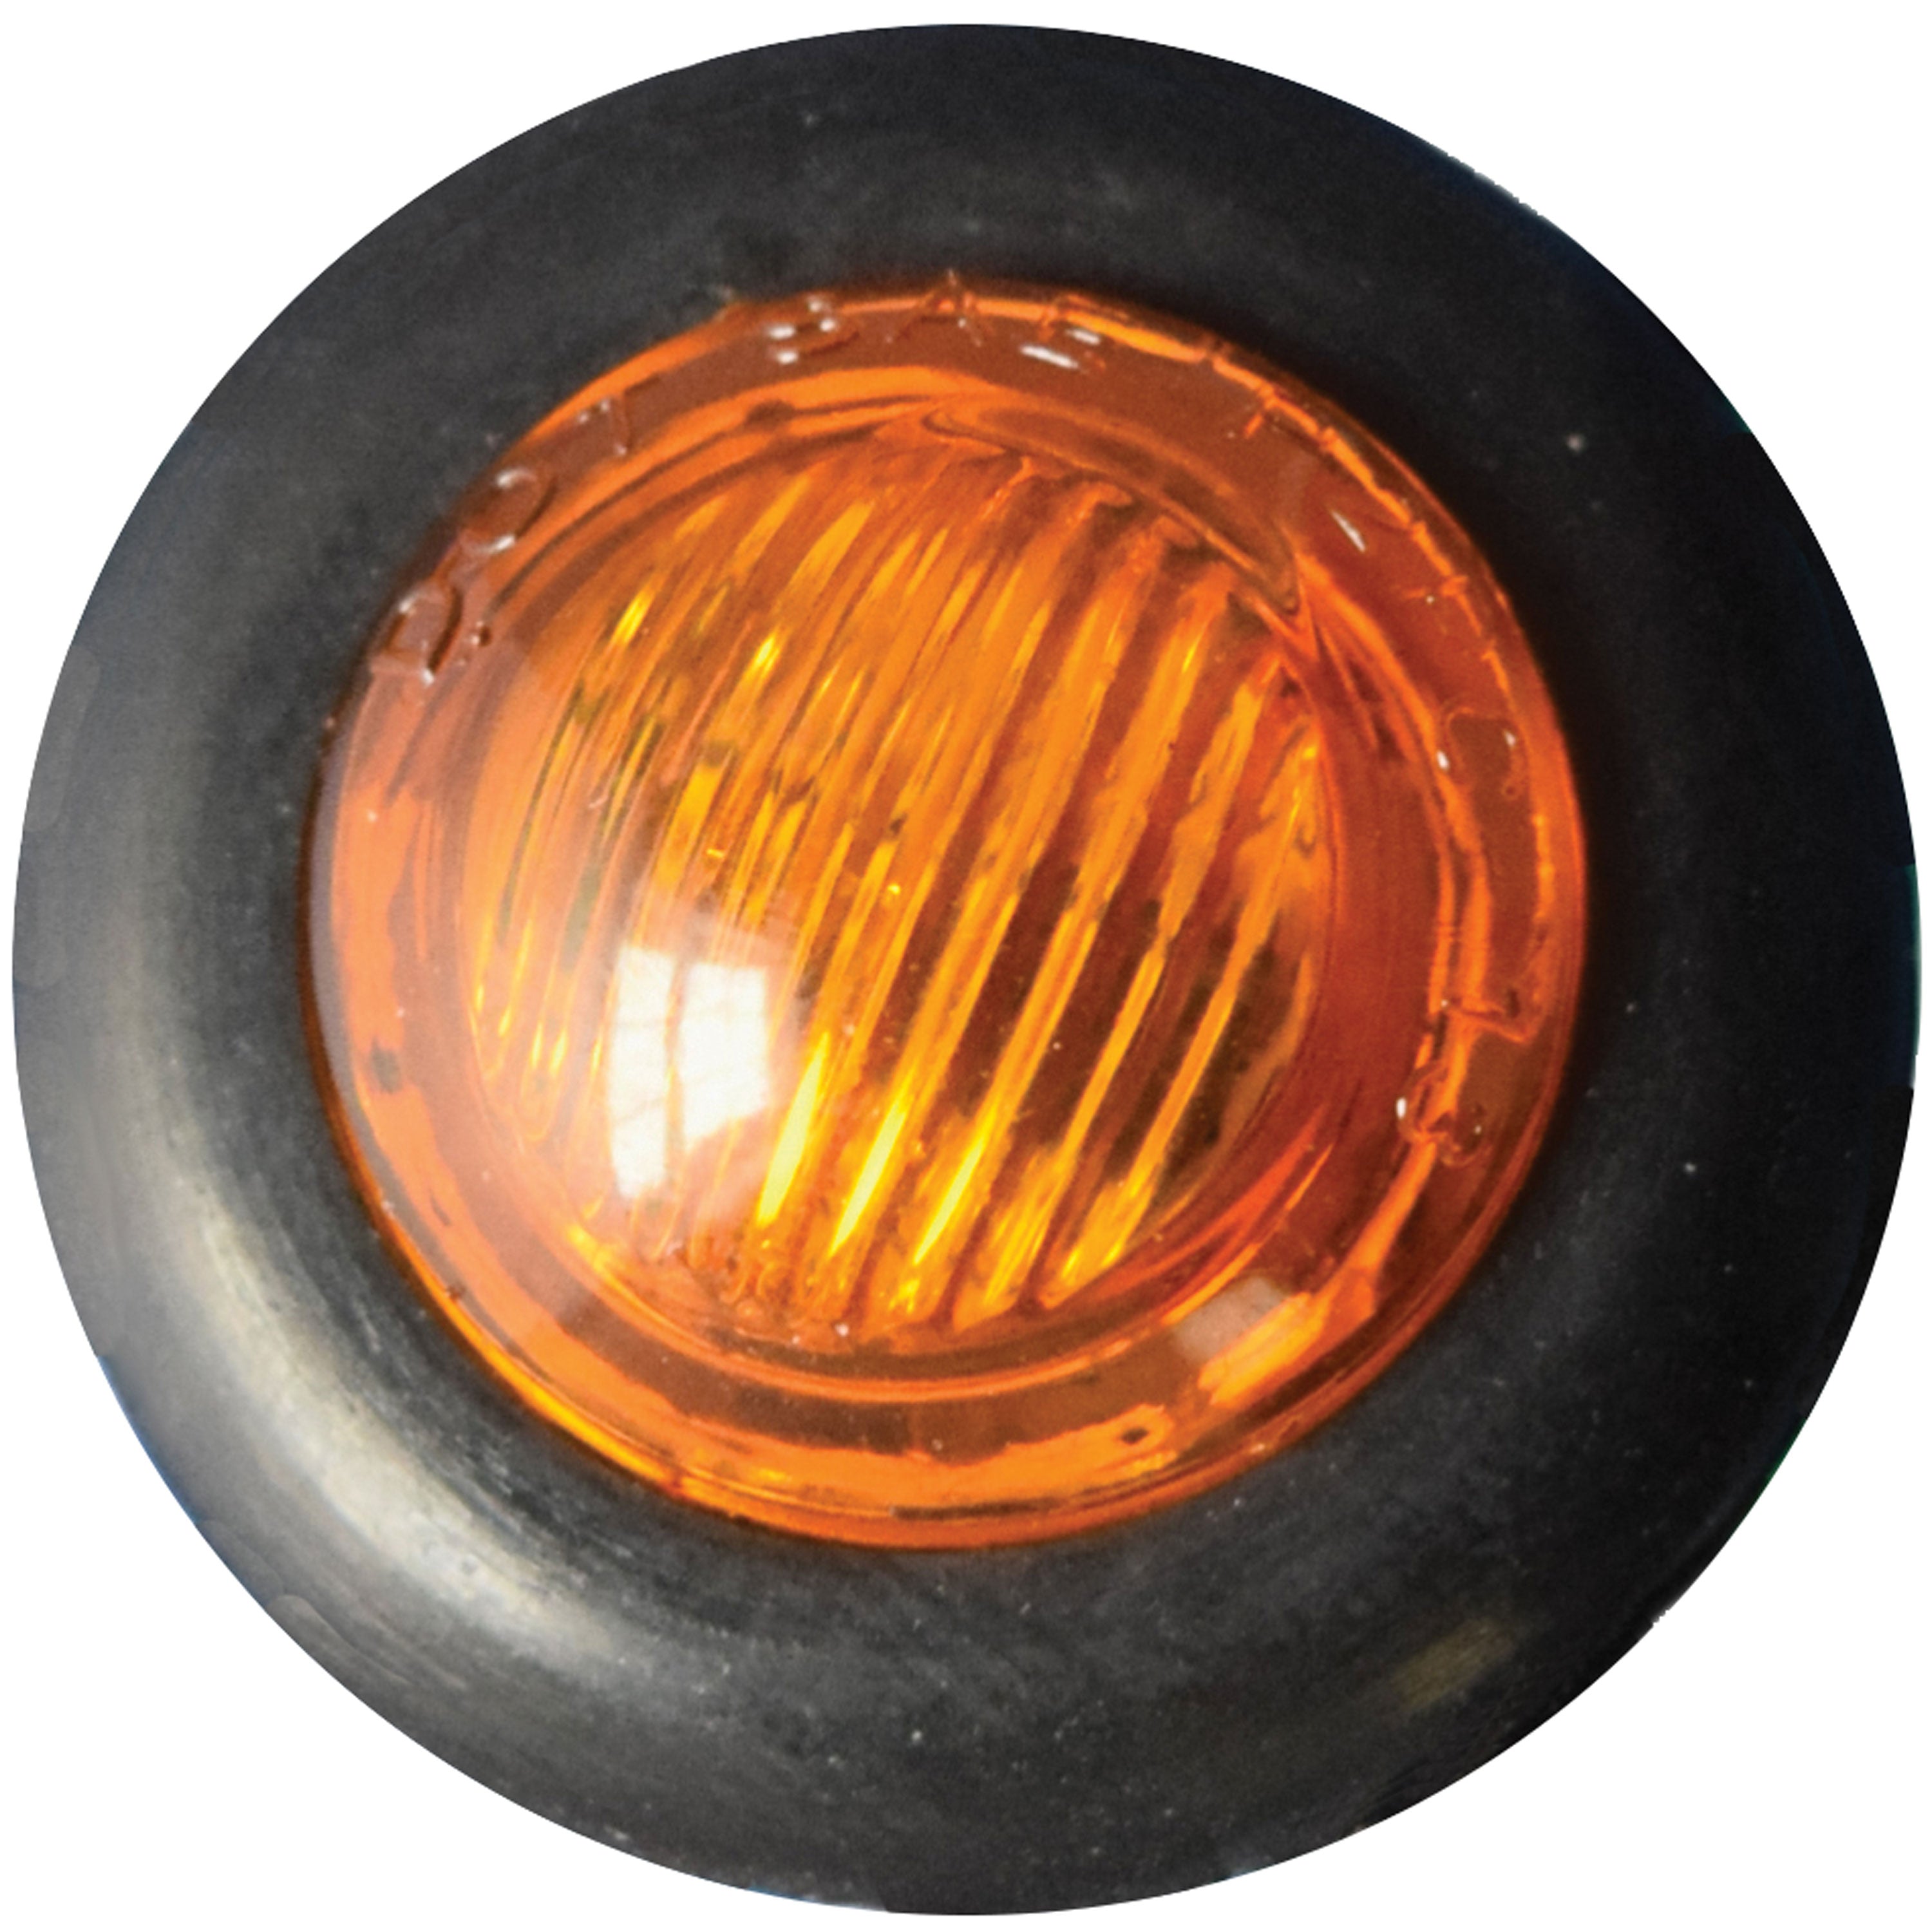 Fasteners Unlimited 003-183AA Bullet Led Light Amber W/ CMD-003-183AA